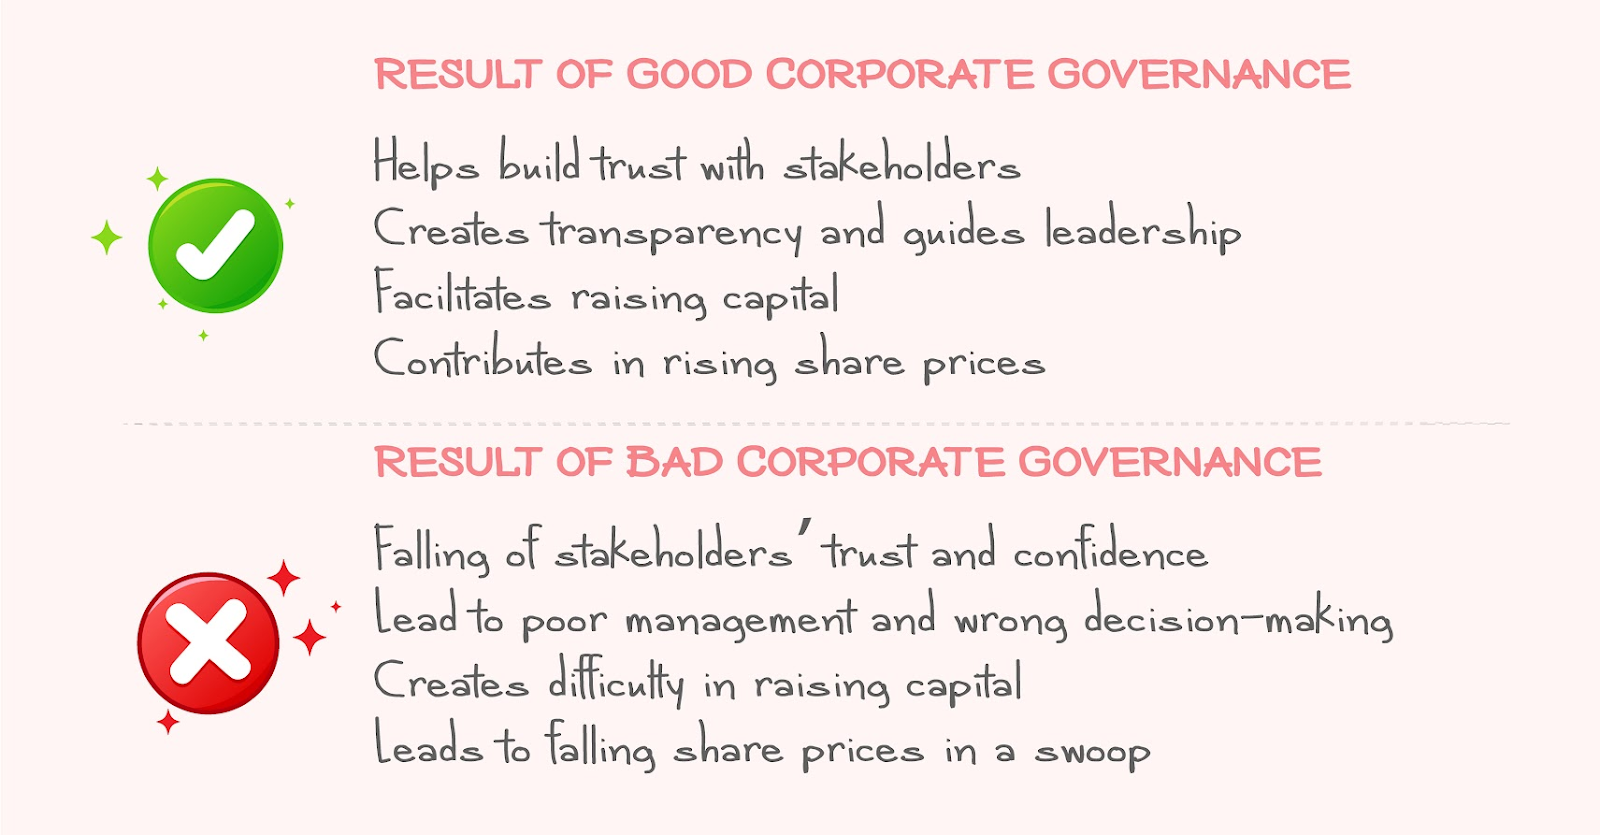 The image below notes the major consequences of good and bad governance for easy understanding.